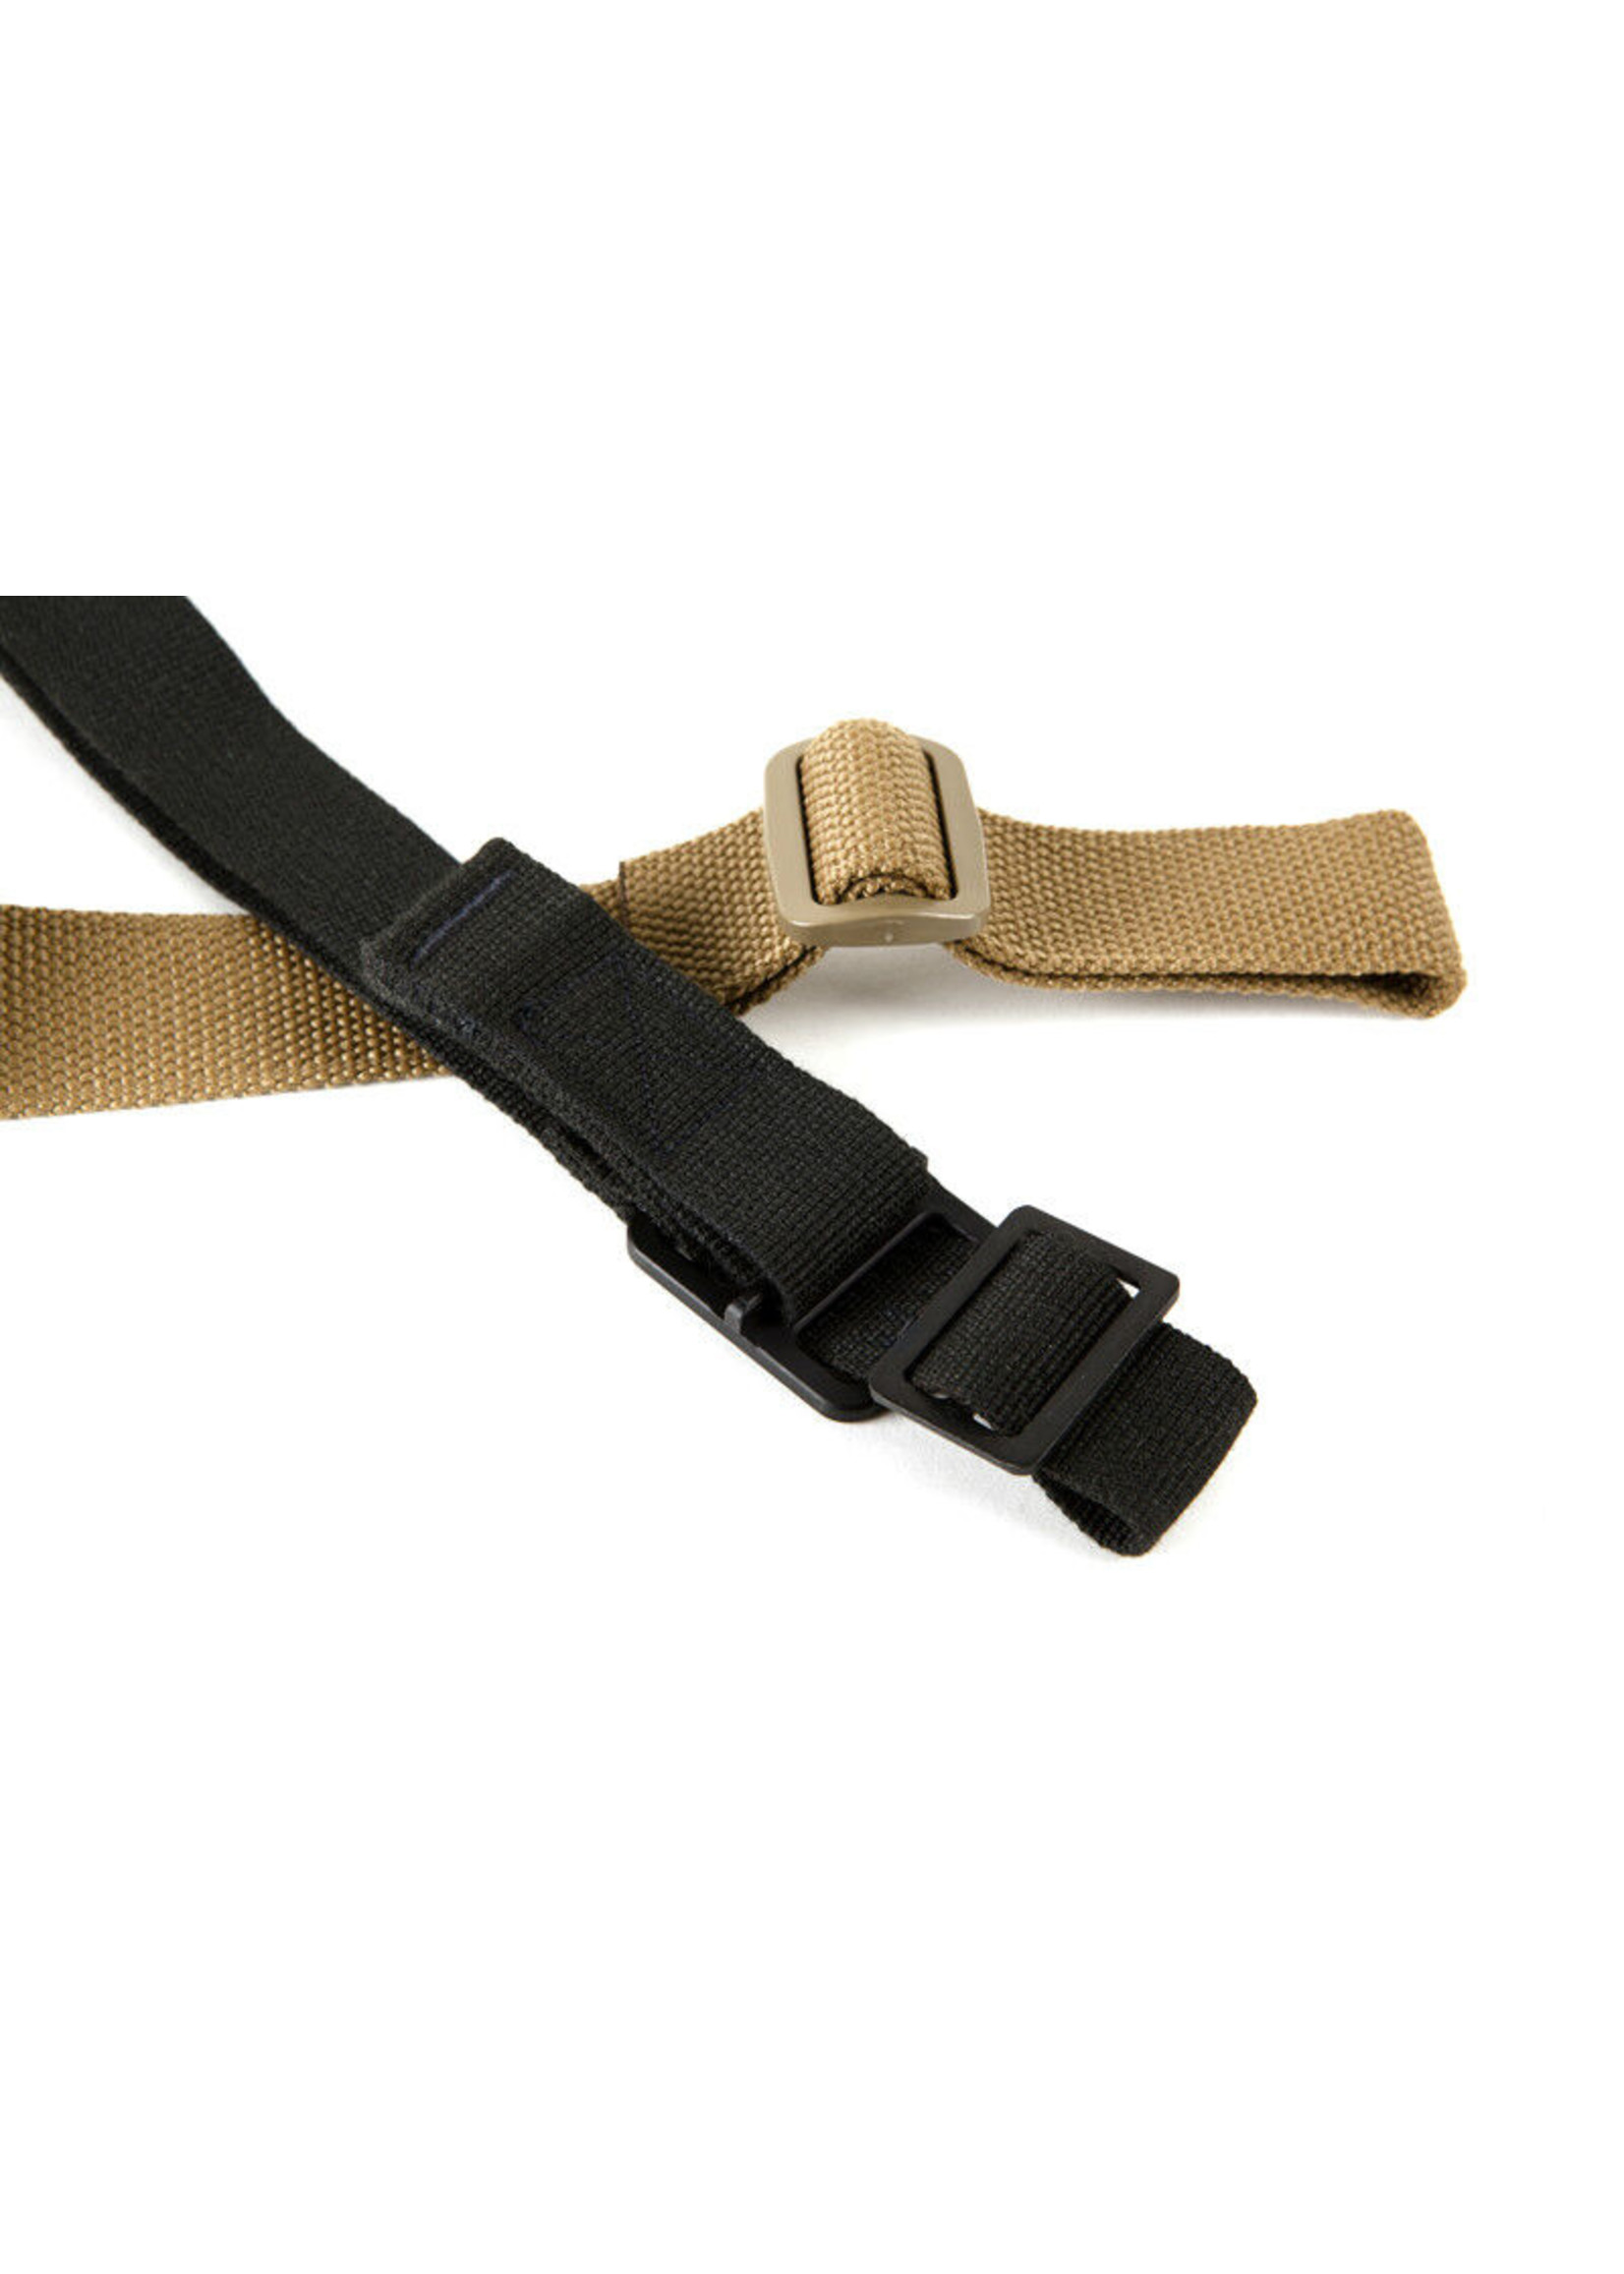 BLUE FORCE GEAR M249 SAW PADDED SLING